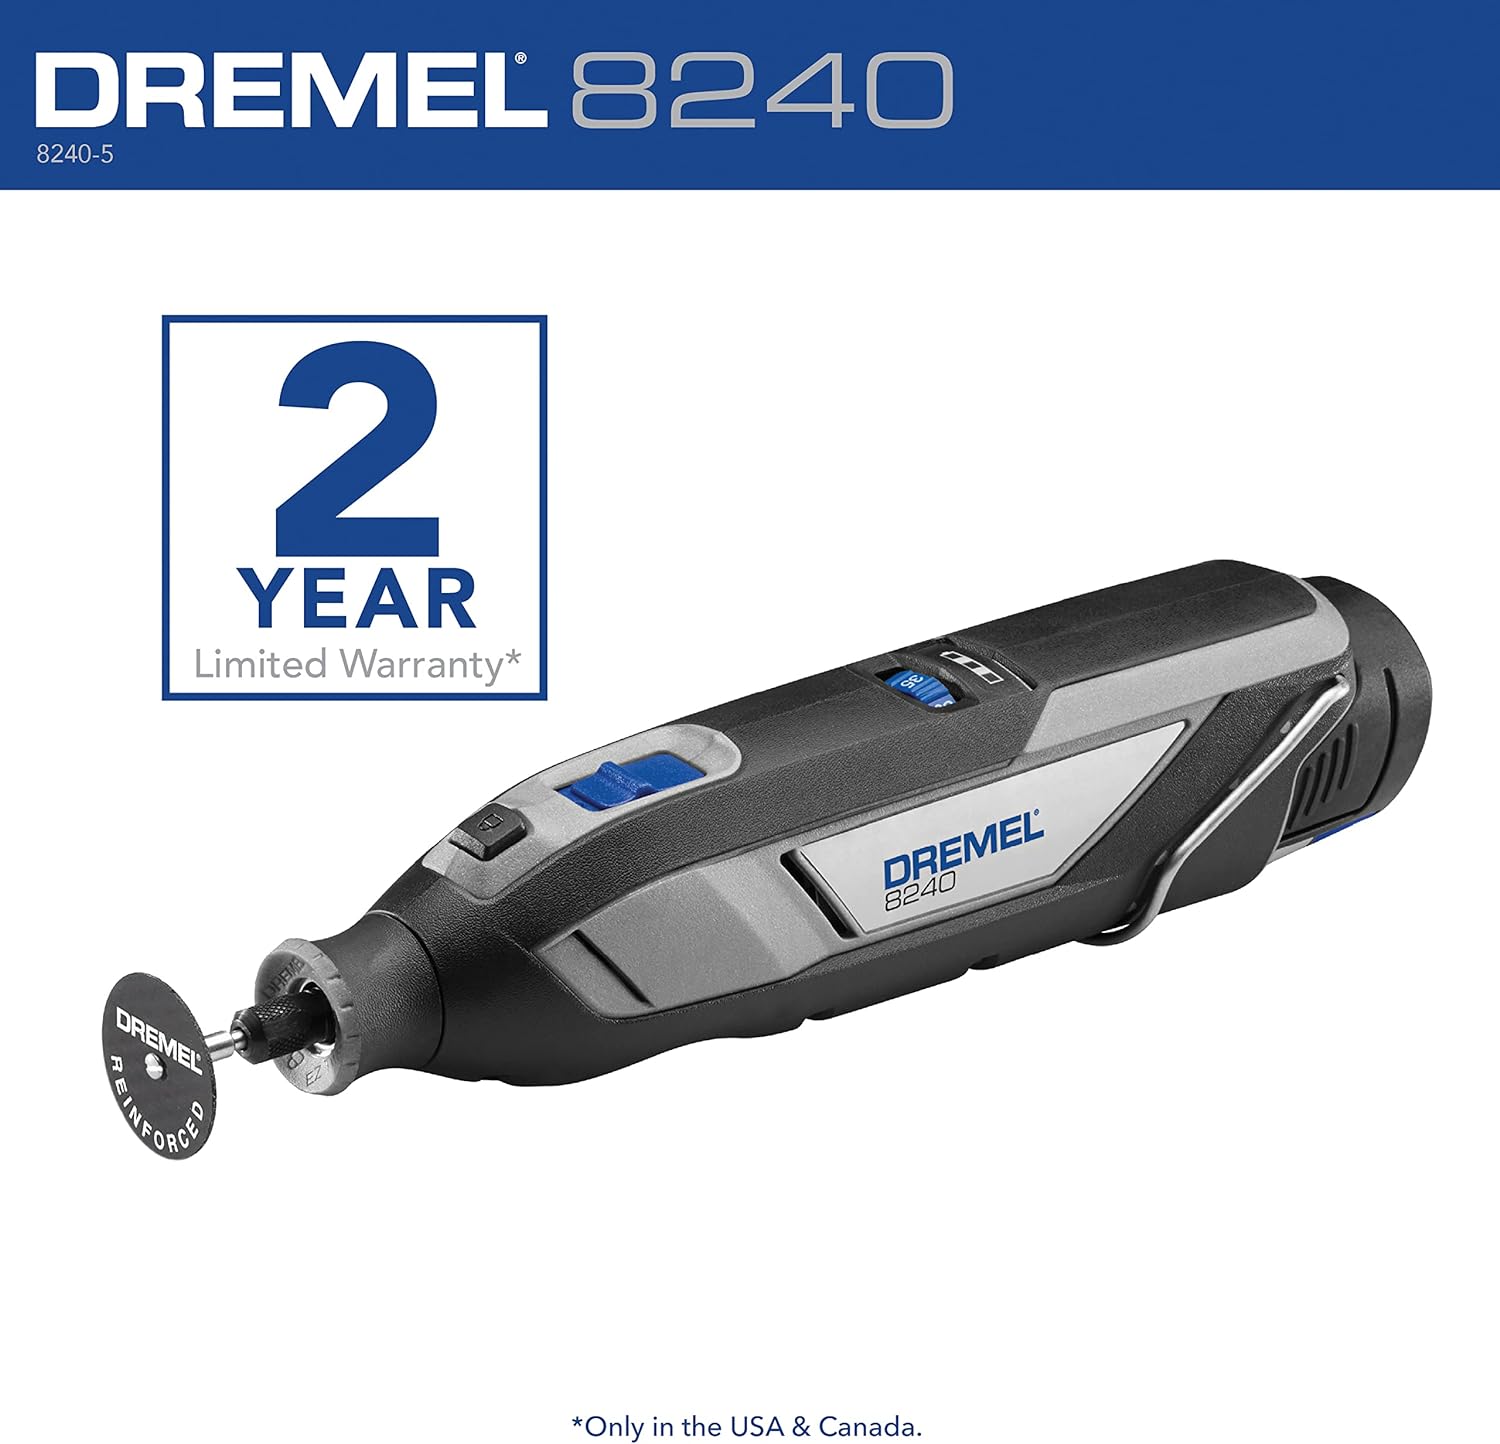 Dremel 8240 12V Cordless Rotary Tool Kit with Variable Speed and Comfort Grip - Includes 2AH Battery Pack, Charger, 5 Accessories  Wrench, Tool Fabric Carry Bag, and Instruction Manual